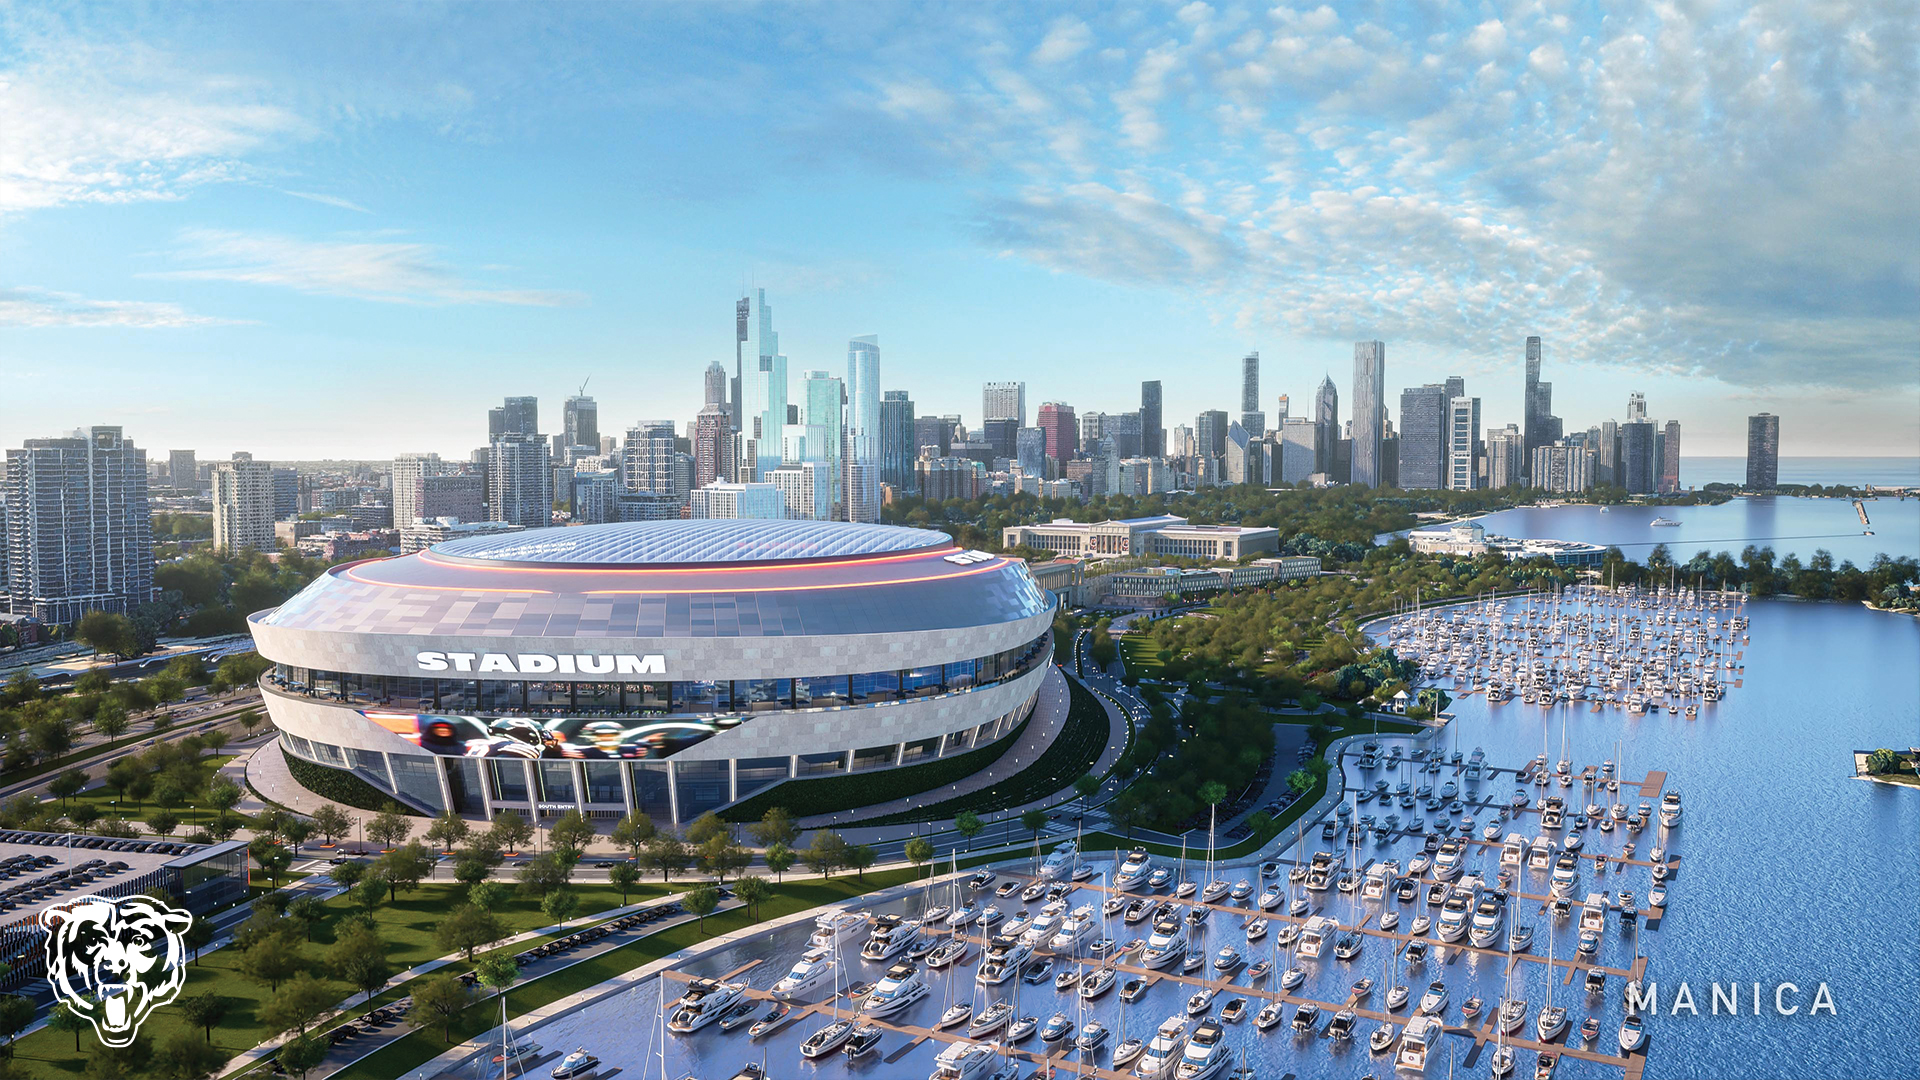 Proposed Chicago Bears stadium seems to be a long shot without Springfield support 